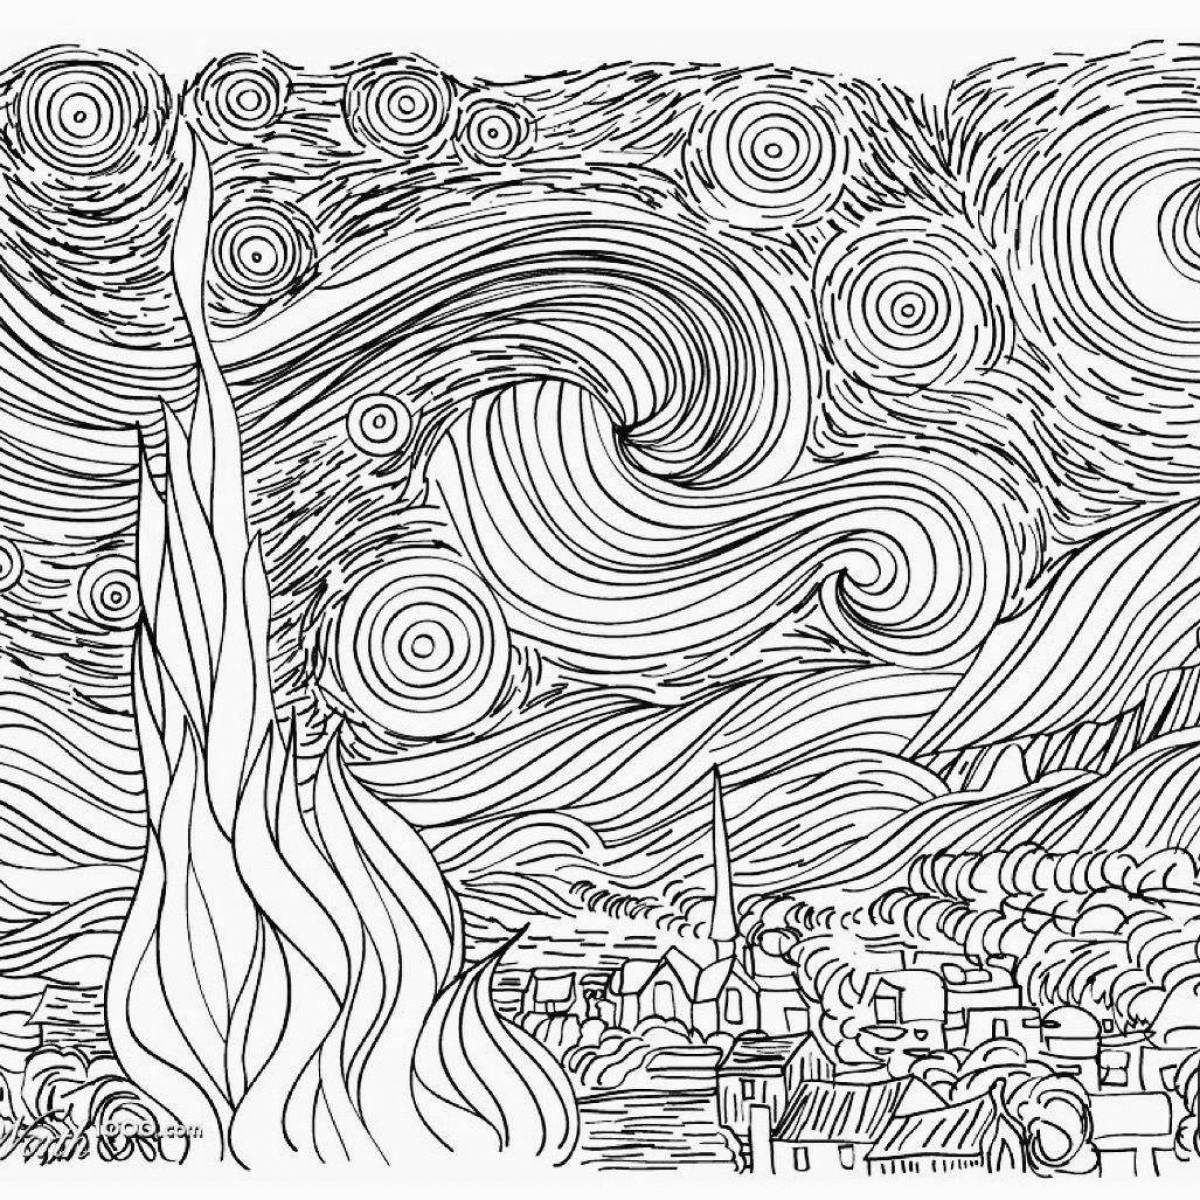 Dramatic van gogh by numbers coloring book